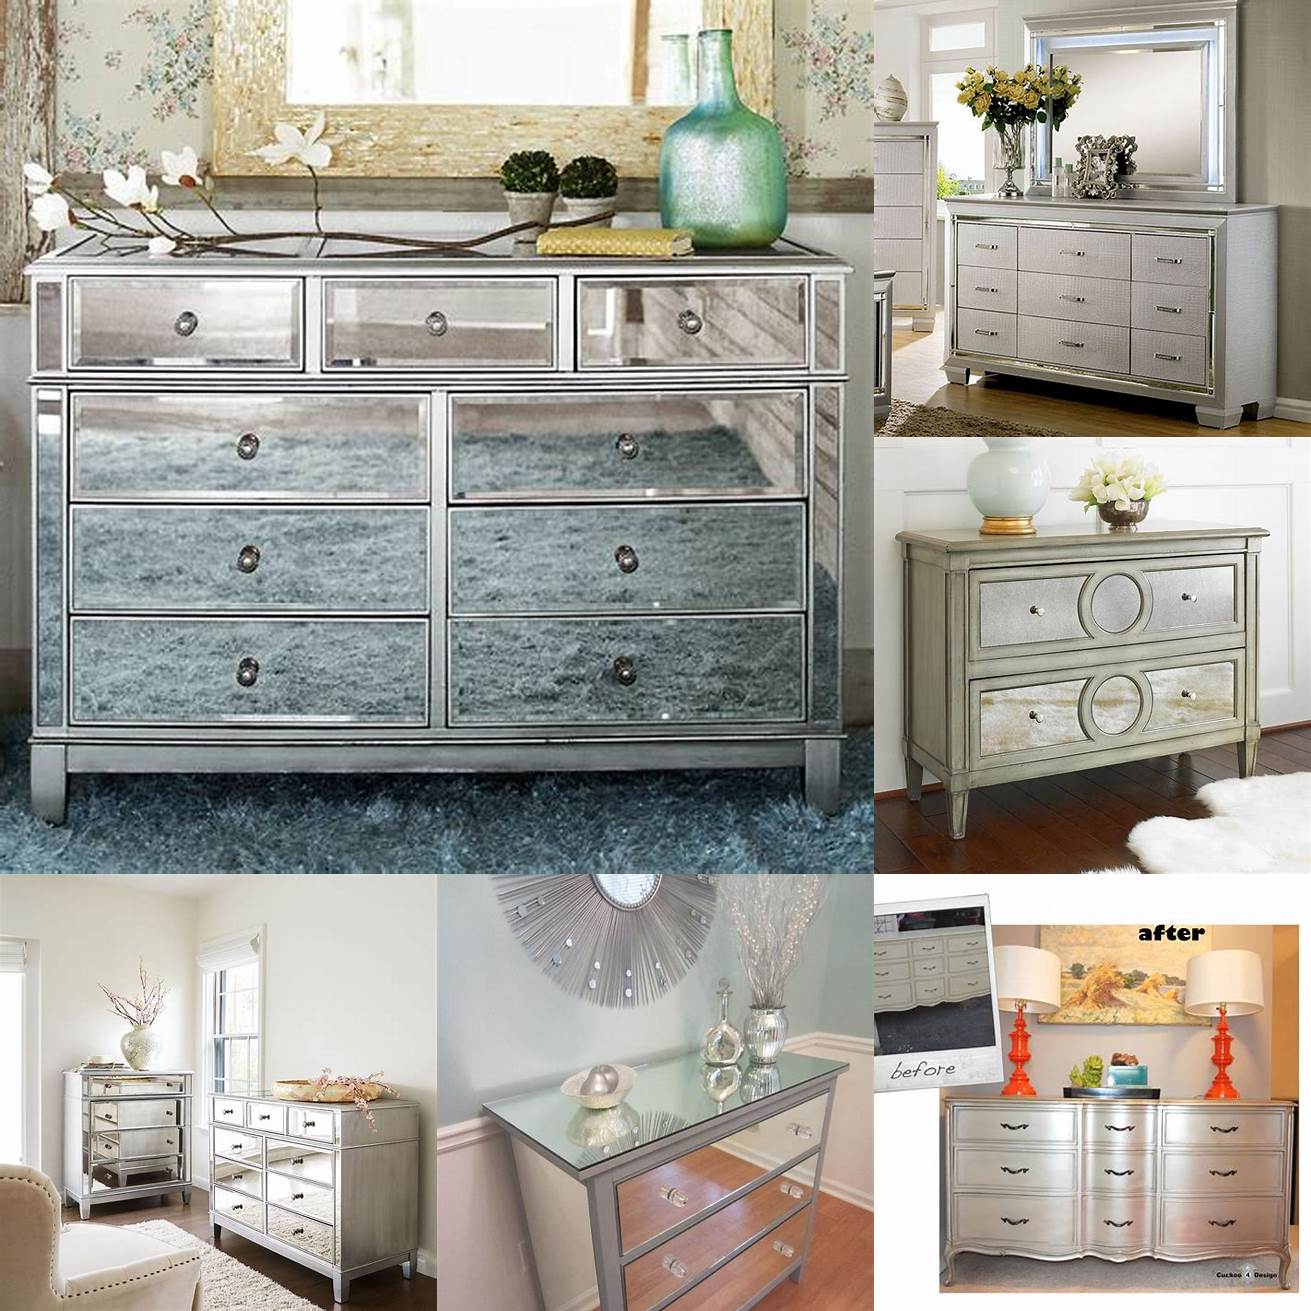 A silver dresser can brighten up a room and make it feel larger